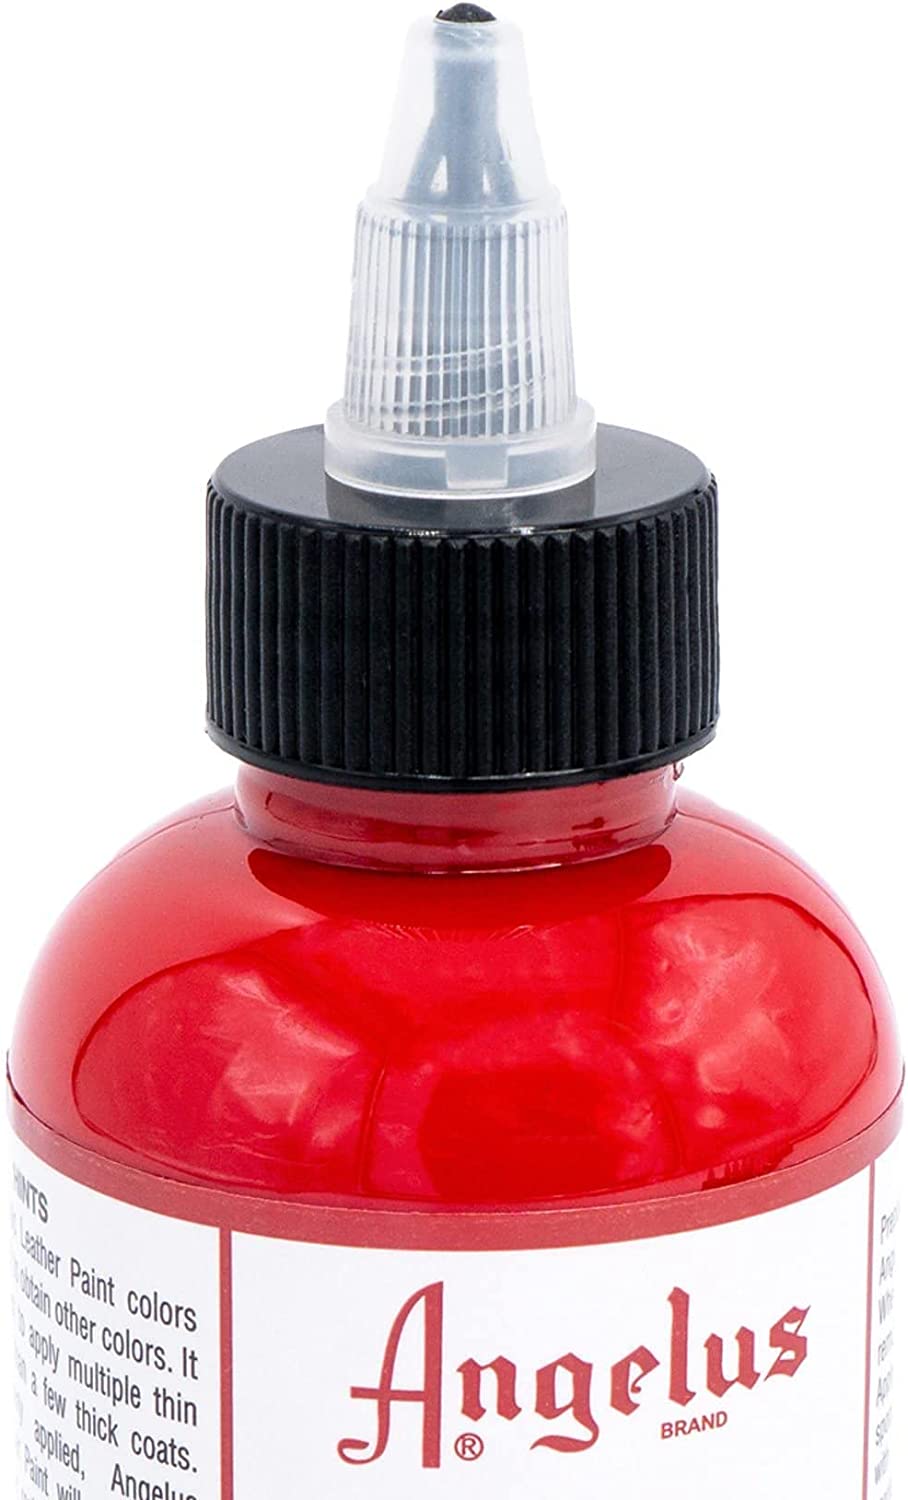 Black & Natural Twist Top Caps, Bottle Cap Size (24/410) Replacement Caps  for Squeeze Bottles Angelus Paint Bottles, Dispensing Caps for Crafts, Art,  Glue and More - 12 Pack - The Vac Shop